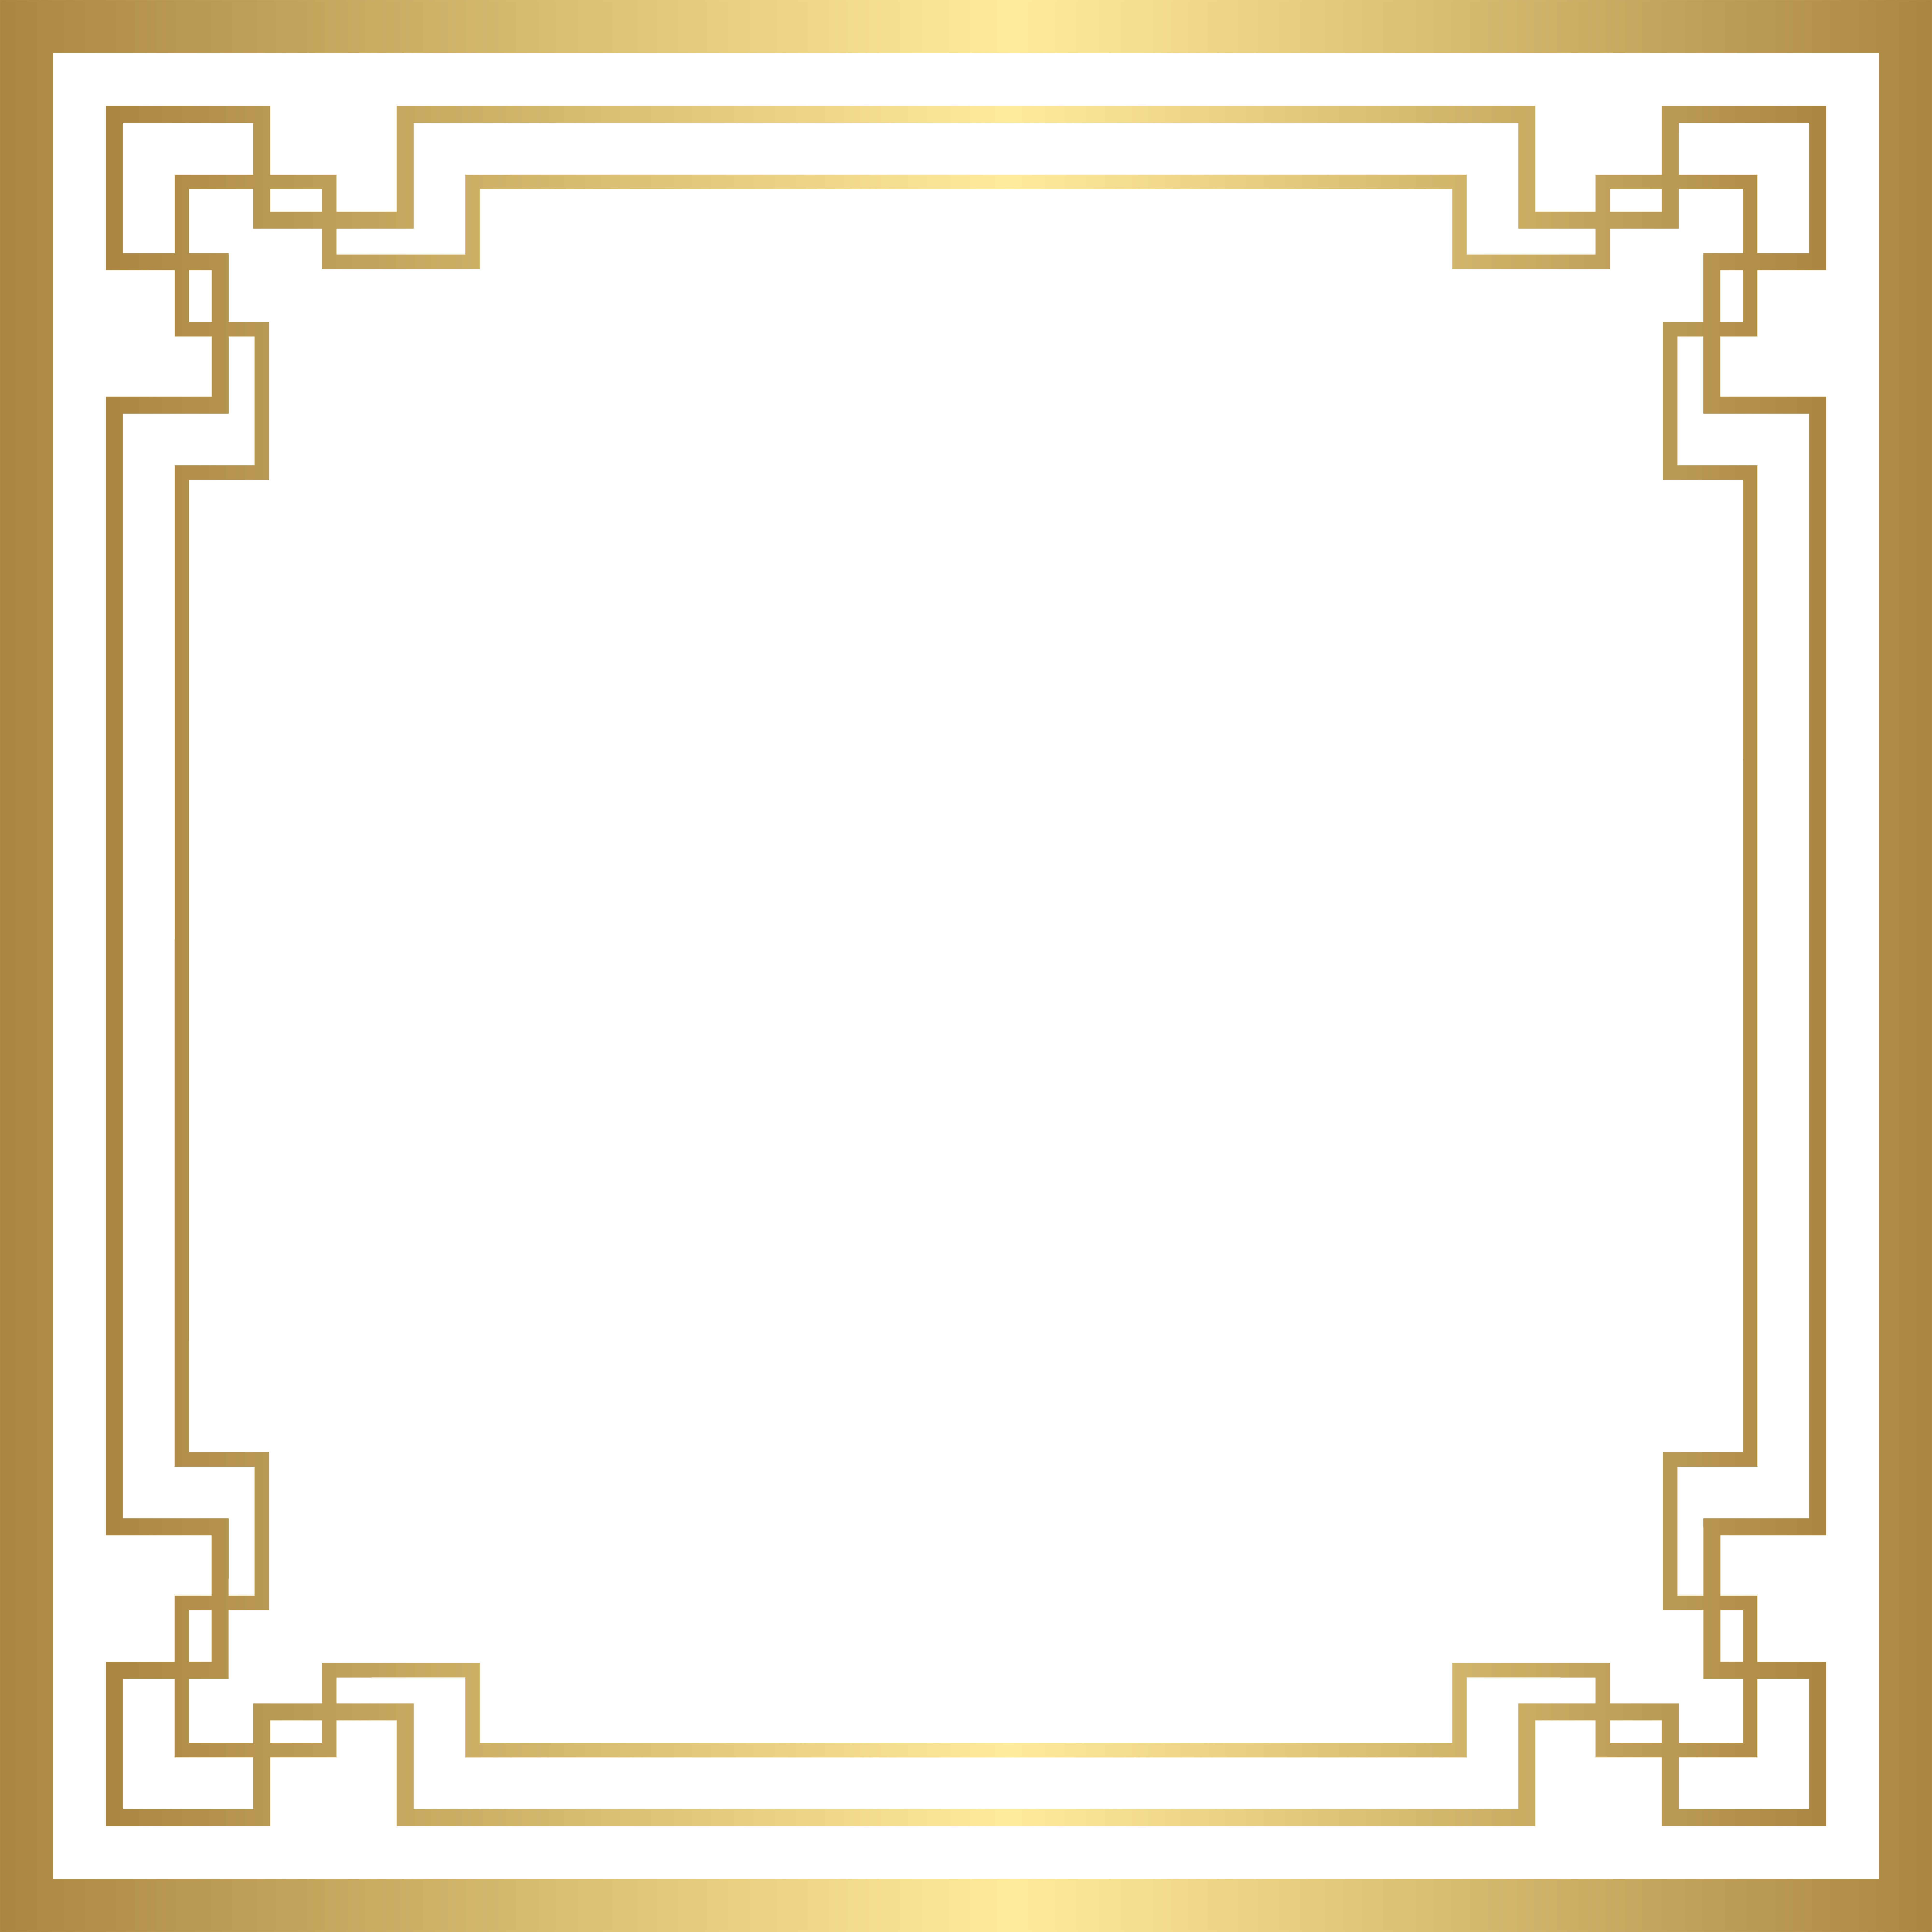 Border deco frame png. Clipart borders gold